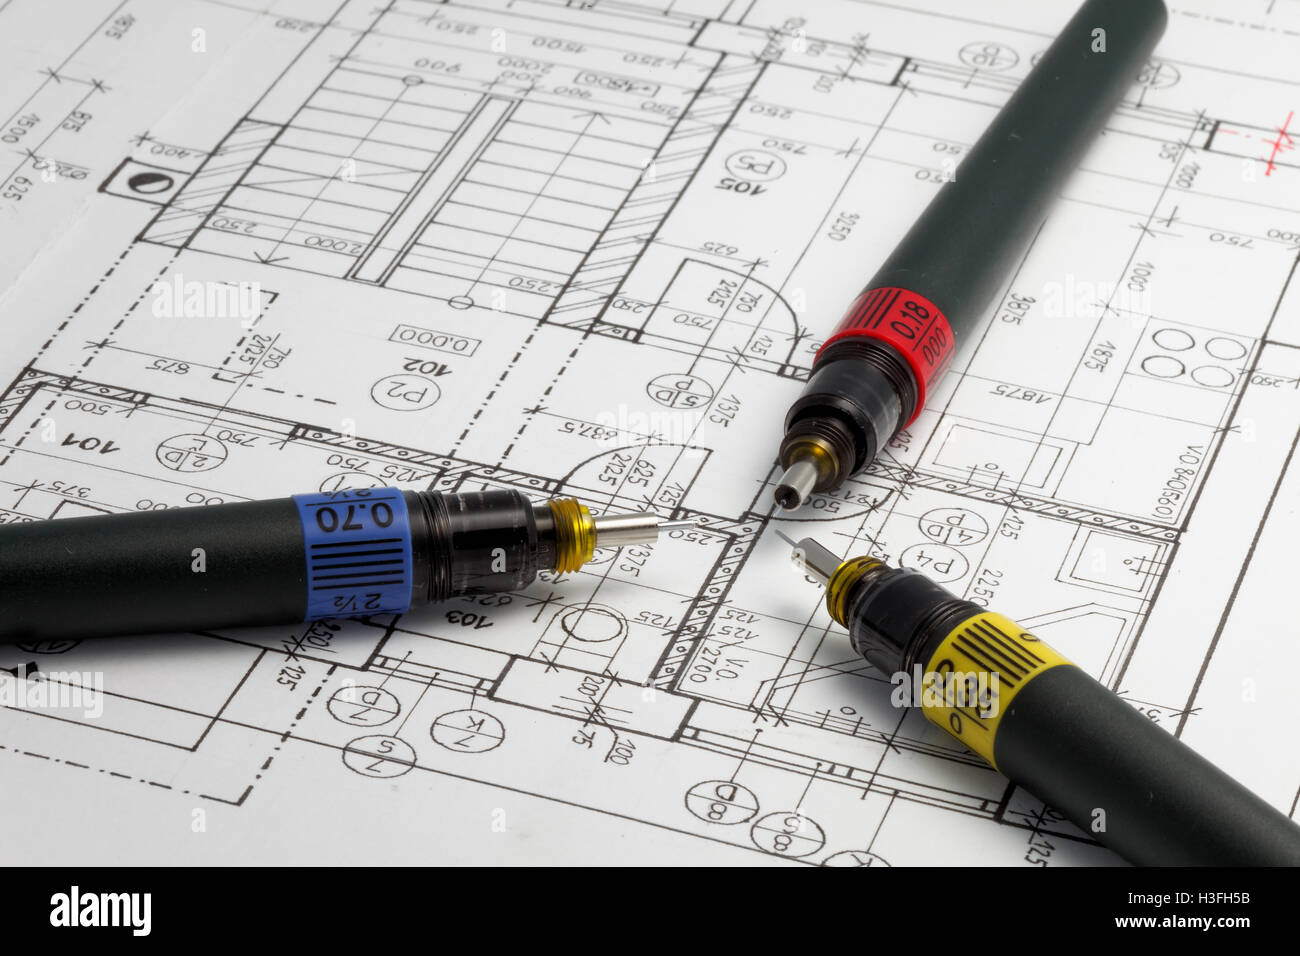 Three basic thicks of special pens for architect on an architect plan. Stock Photo